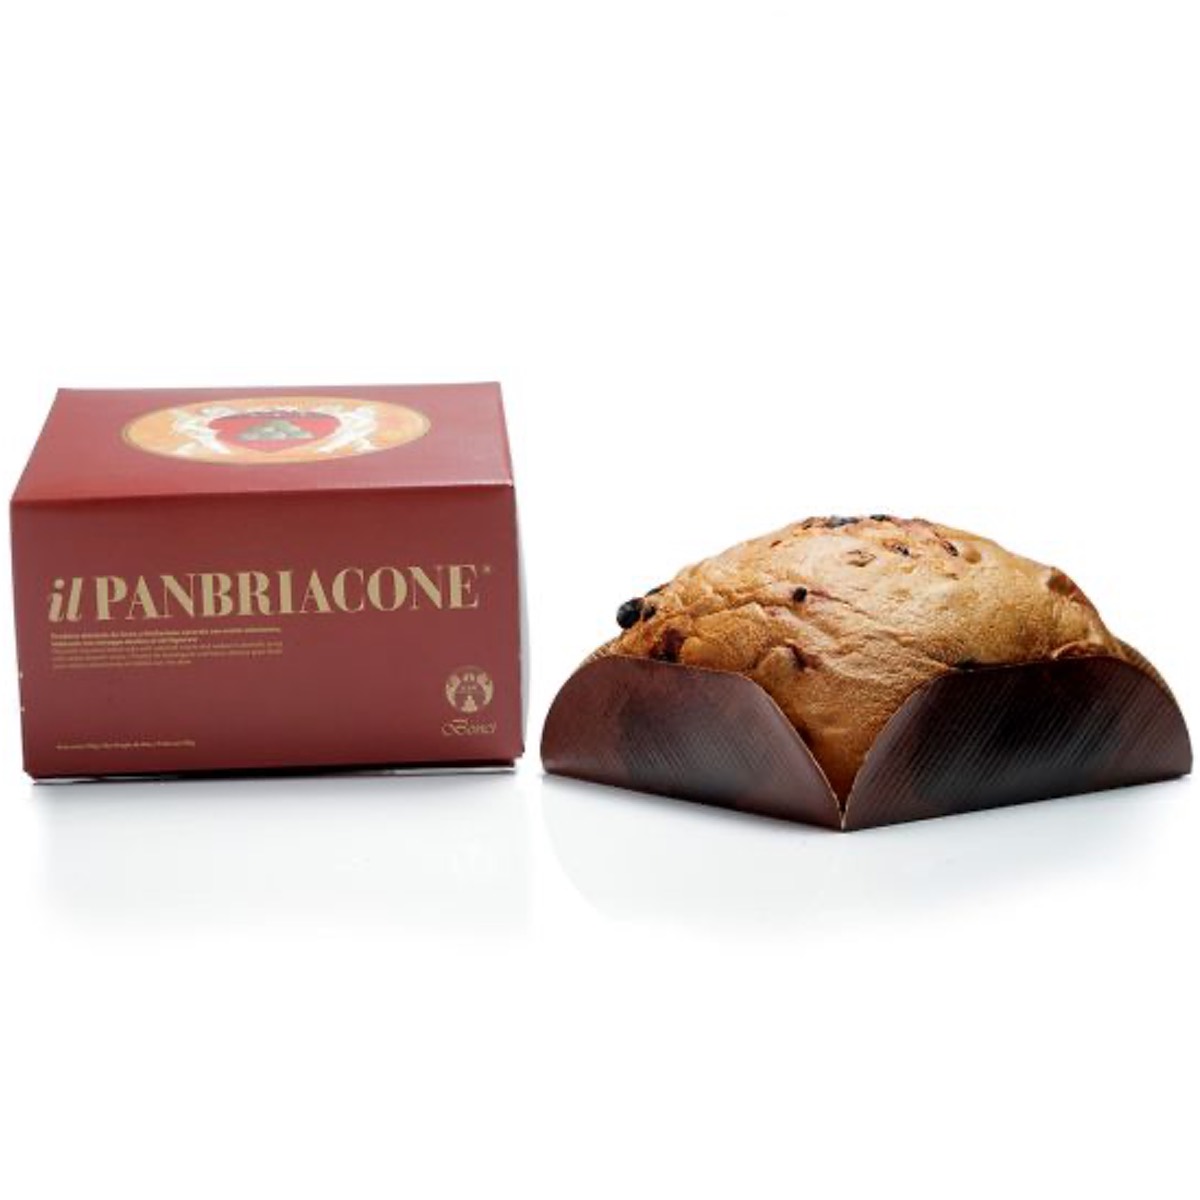 Il Panbriacone 800g